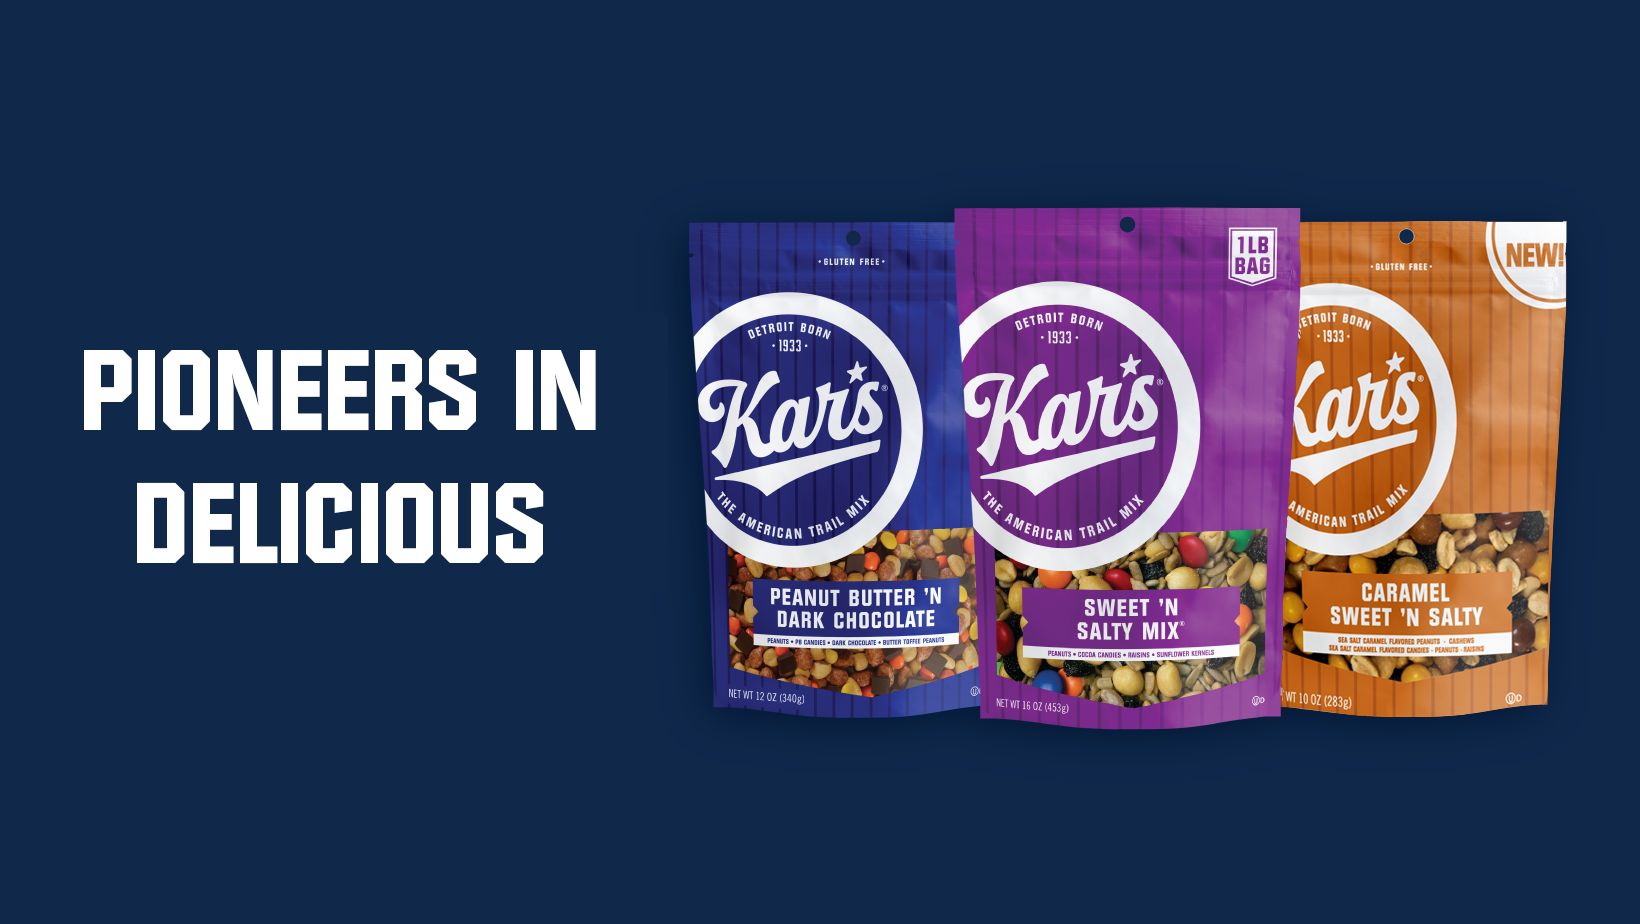 Image of three bags of Kar's Trail Mix